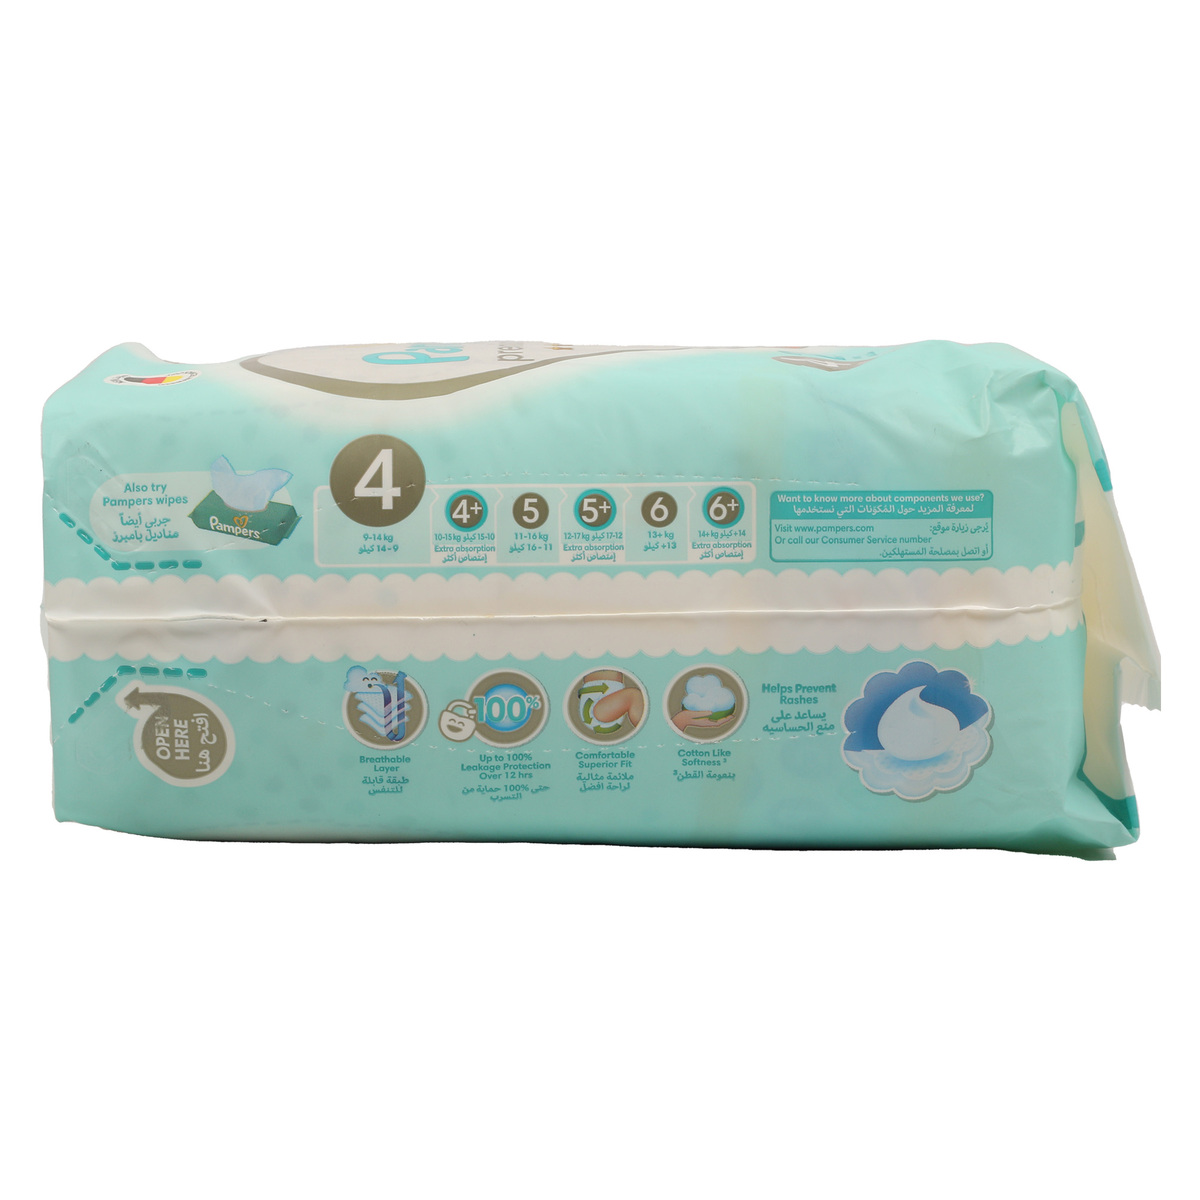 Pampers Premium Care Diaper Extra Absorb Size 4, 9-14kg Value Pack 23pcs